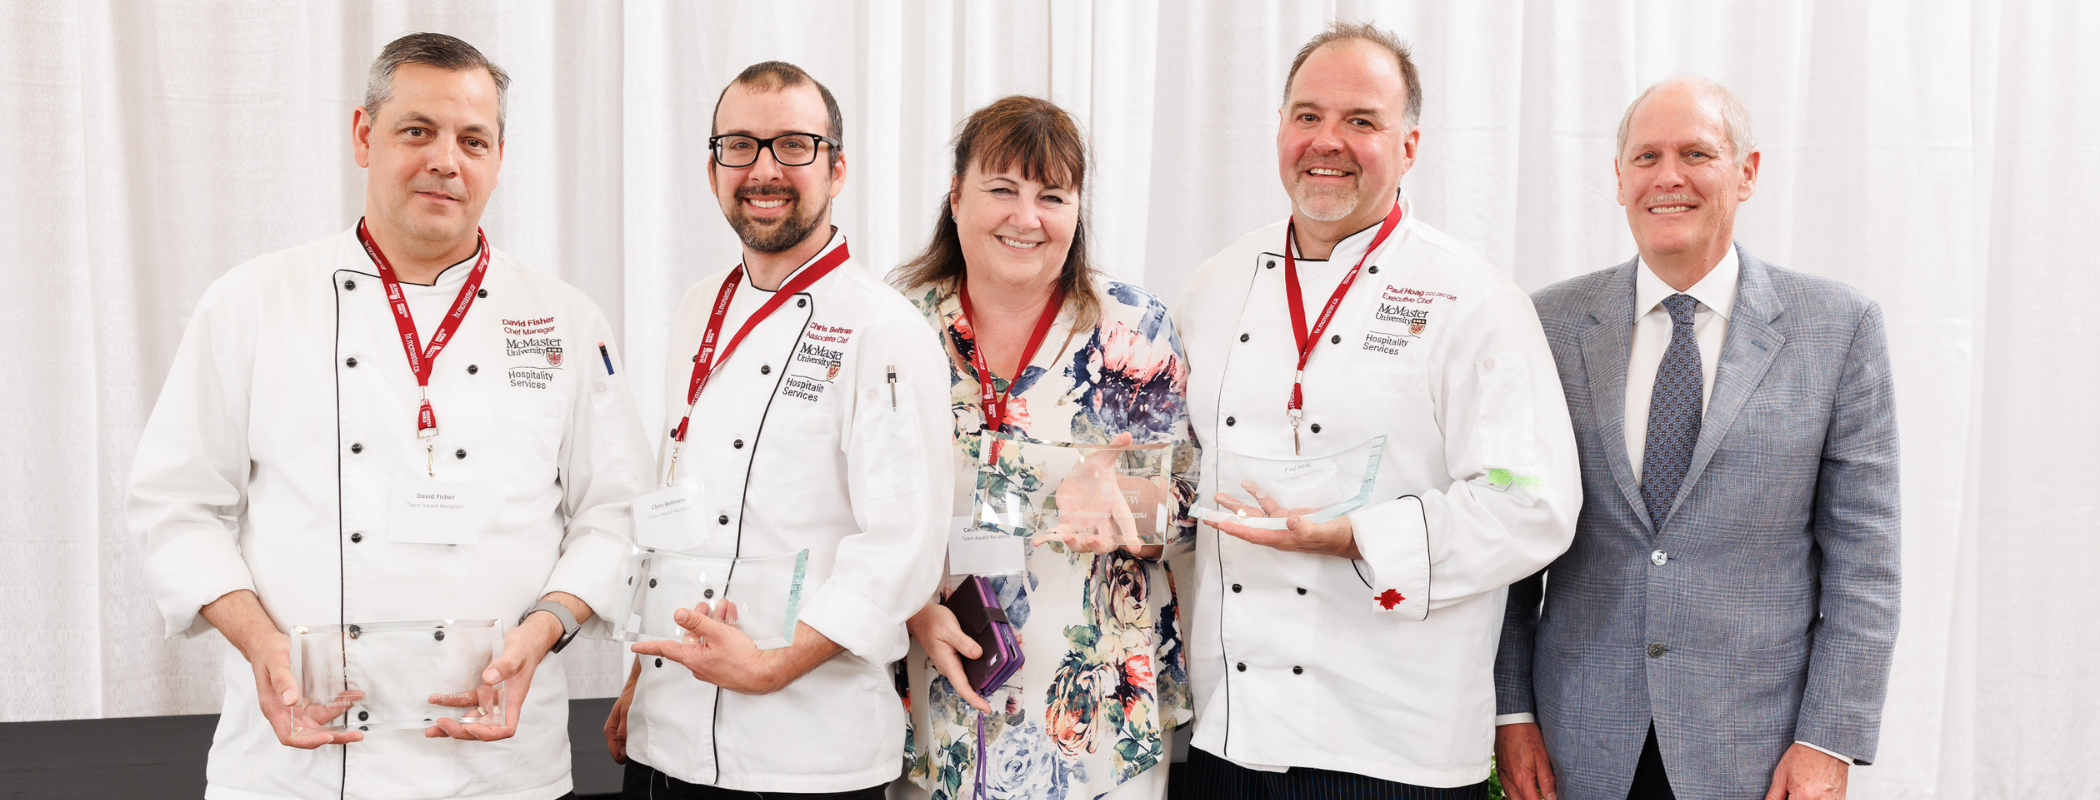 Five people posing for a photo. Three of them are in chef's whites. 